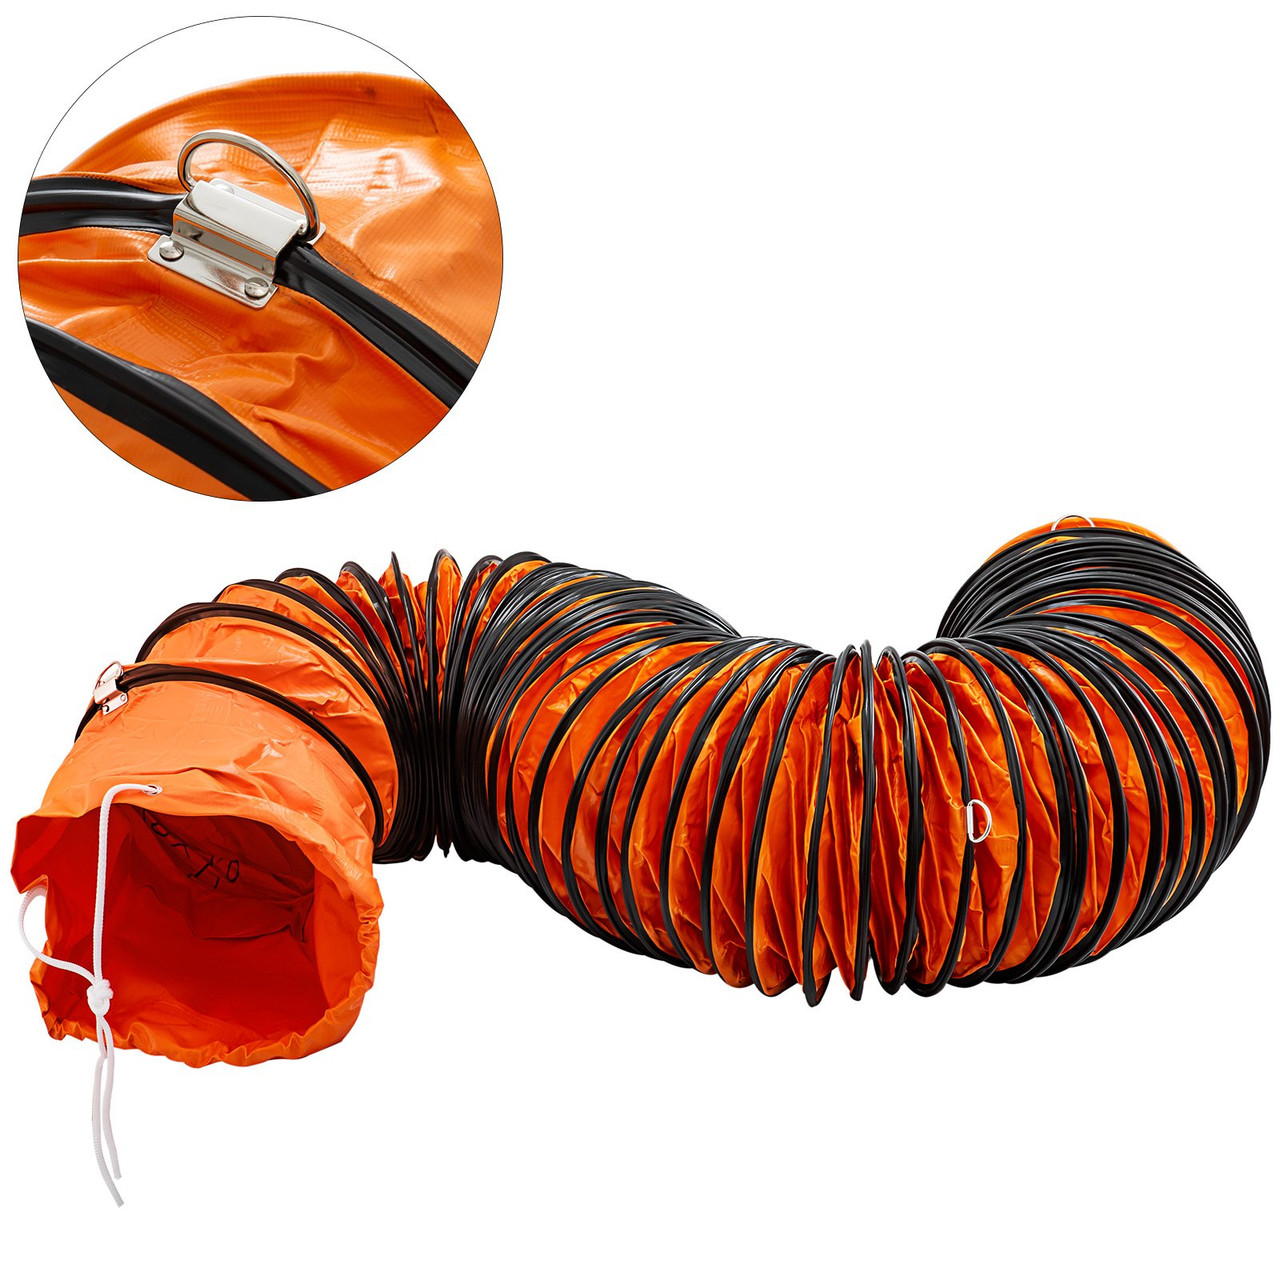 Ducting Hose, 25ft PVC Flexible HVAC Duct Hosing for 10 Inch Utility Blower Exhaust Fan